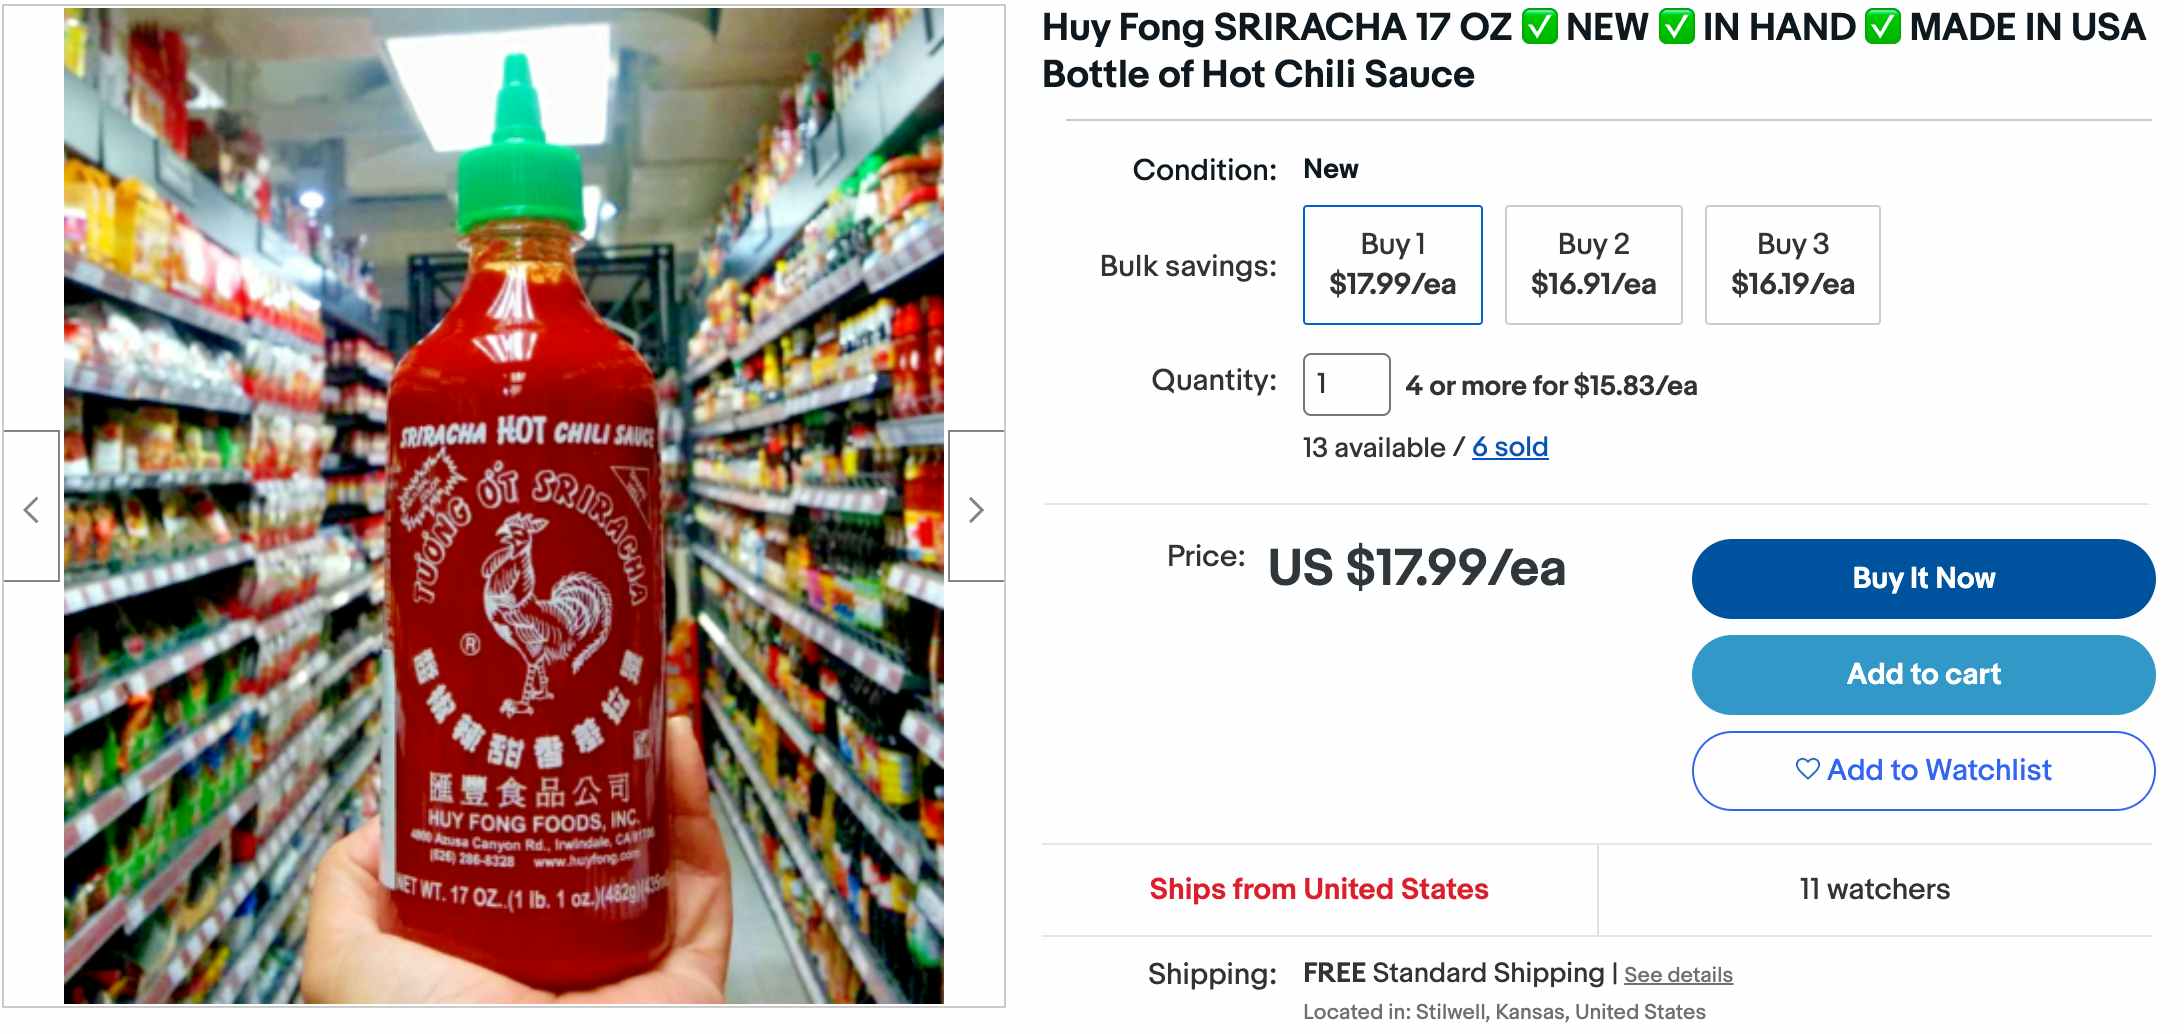 Screenshot of a Sriracha product detail page on eBay with higher prices listed